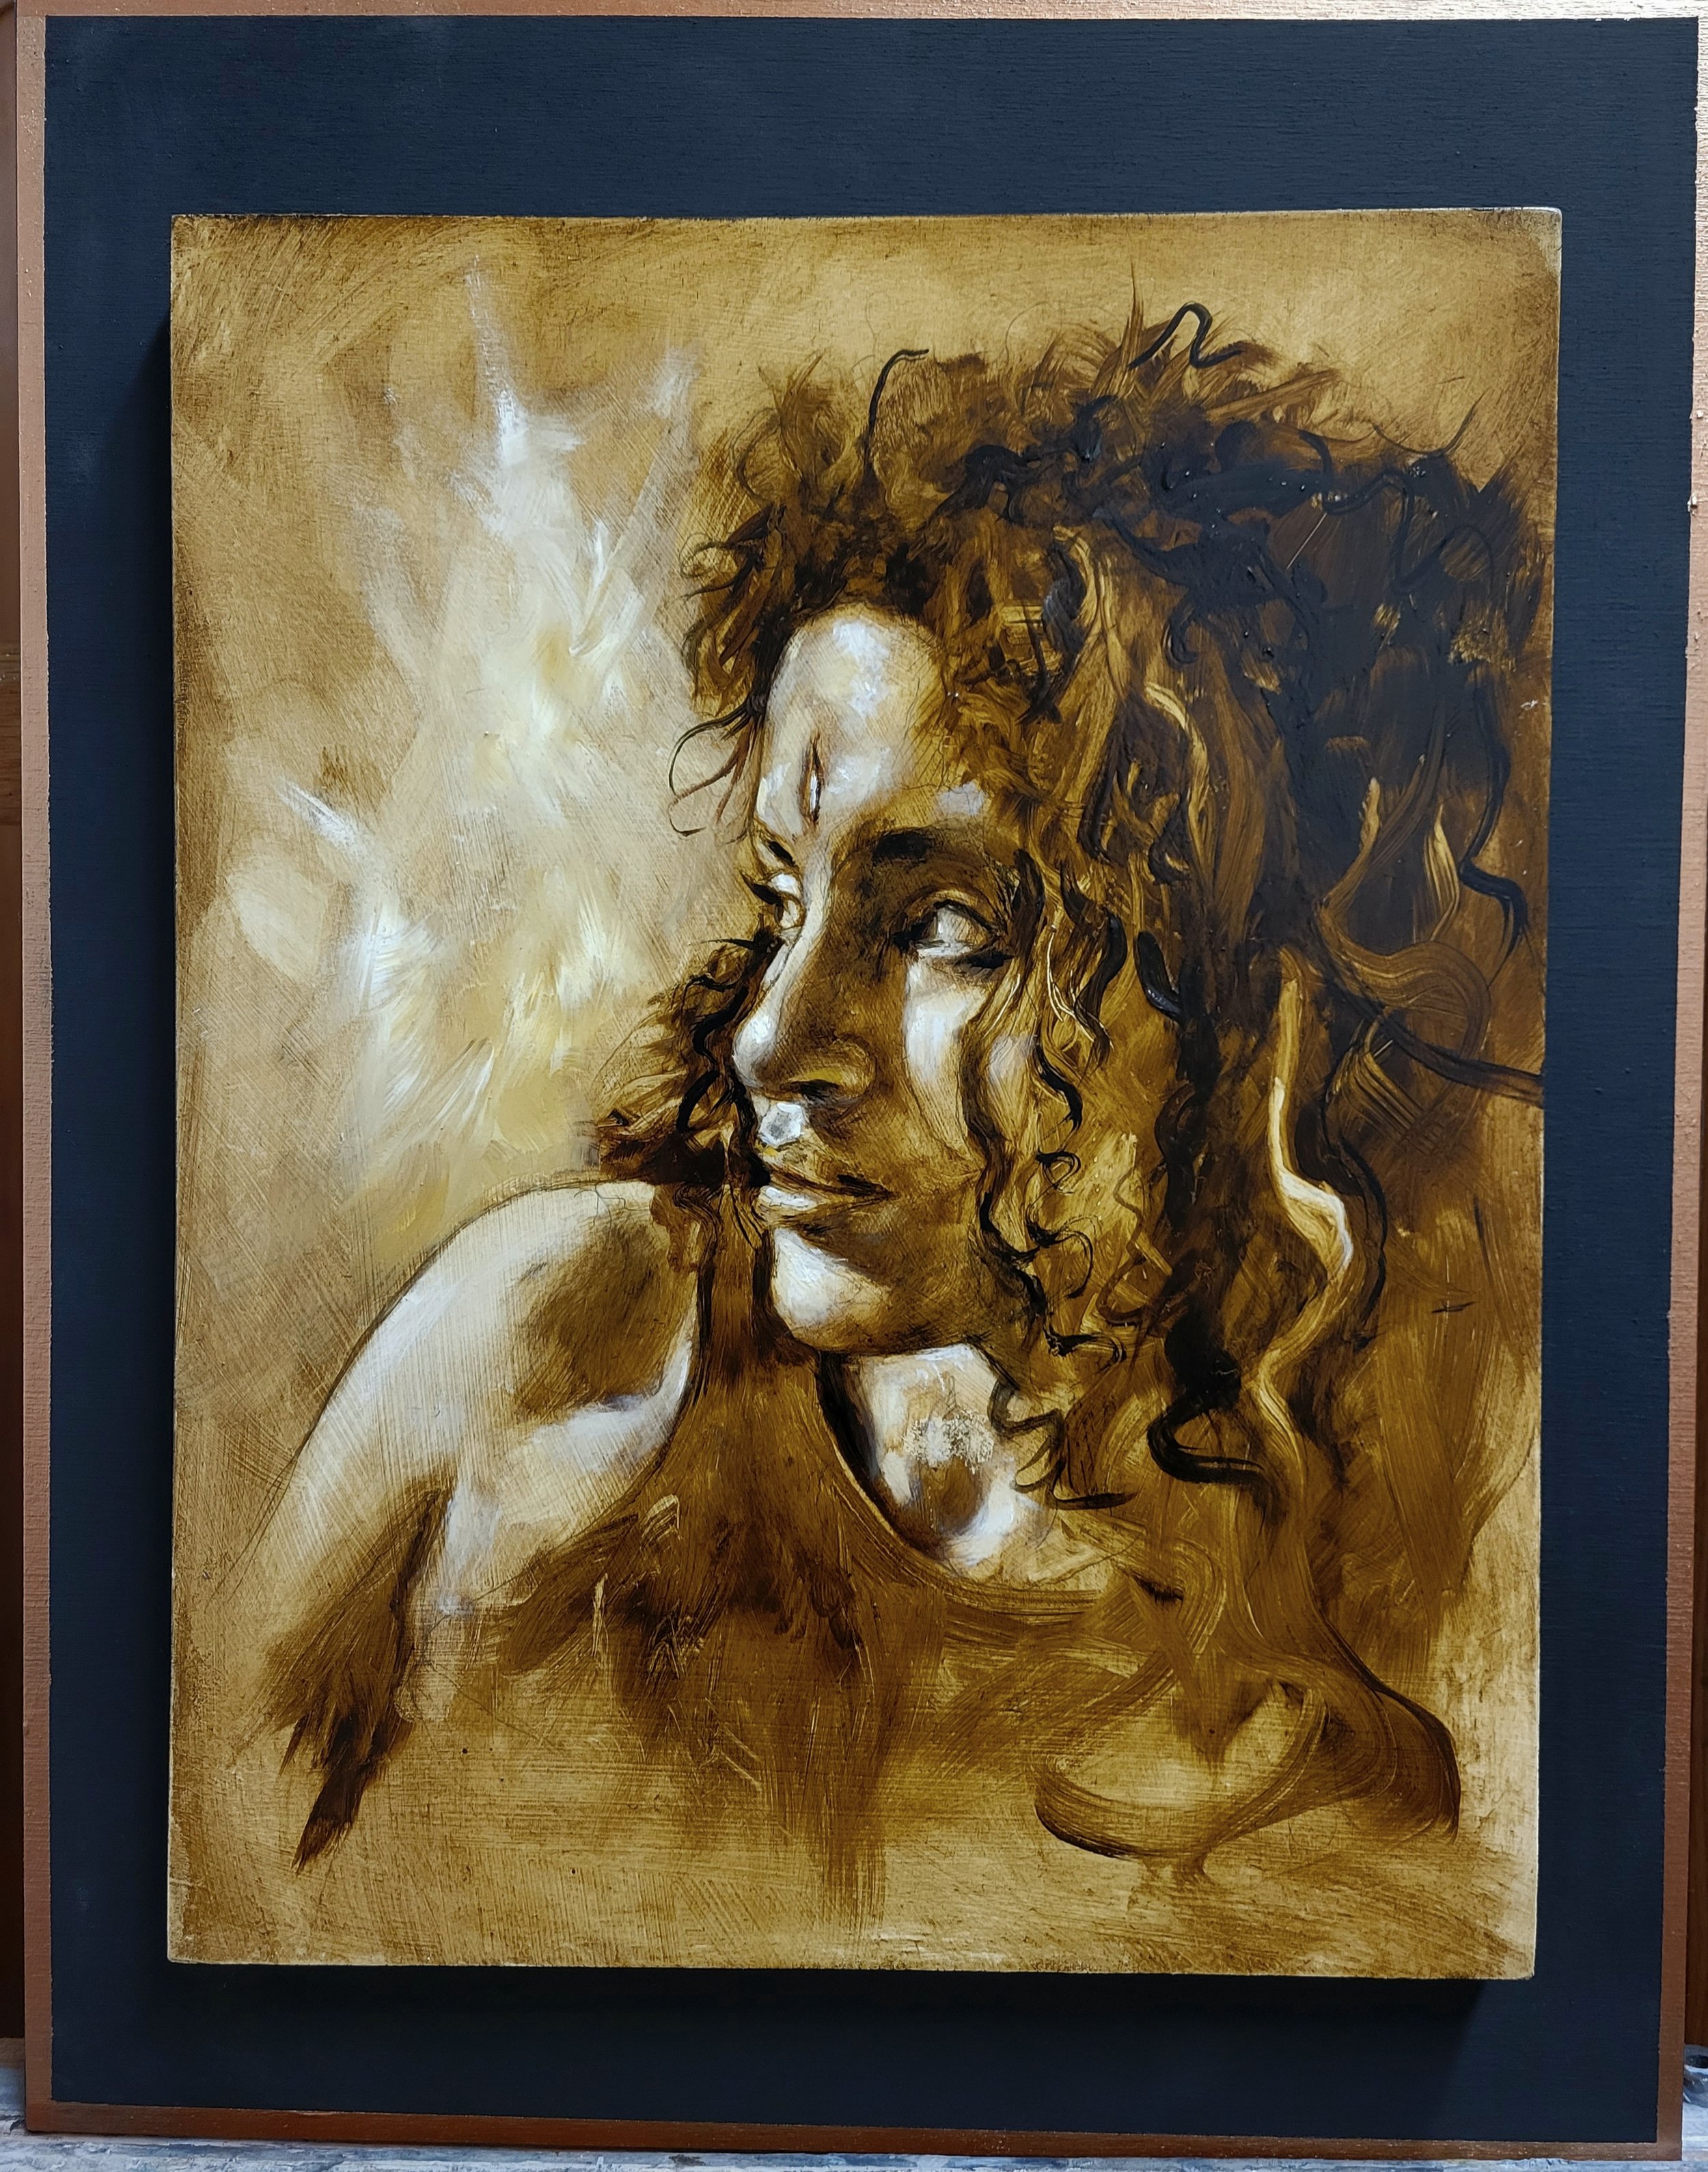 Desiree grisaille study